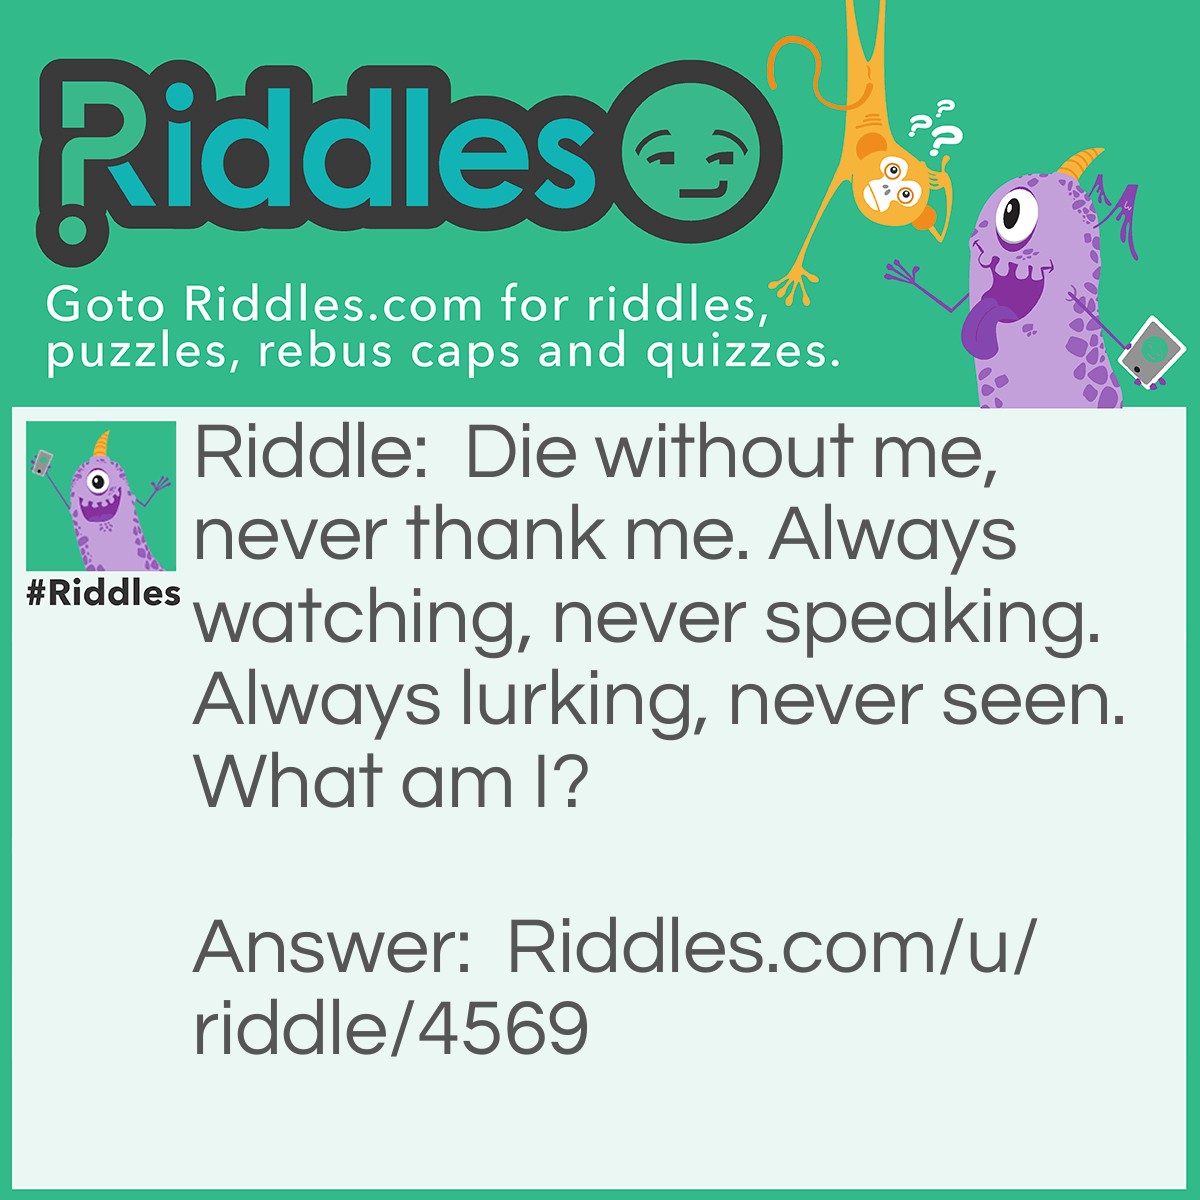 Riddle: Die without me, never thank me. Always watching, never speaking. Always lurking, never seen. What am I? Answer: Air.